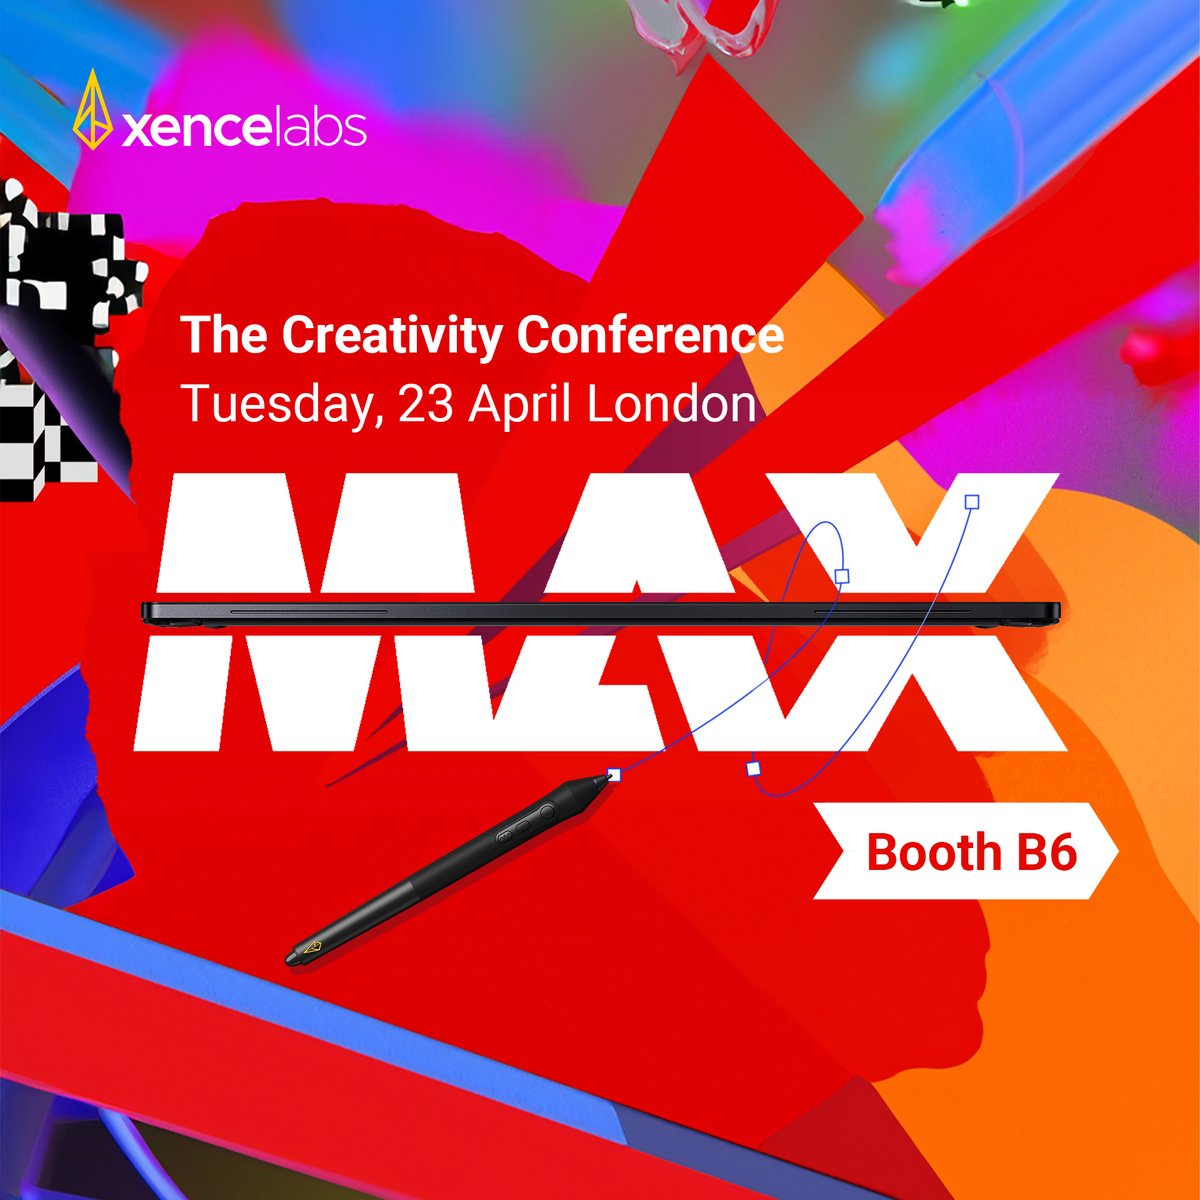 Going to Adobe Max London today?
Xencelabs will be there too! Come see us and you might just catch an exclusive sneak peek of the Pen Display 16, releasing globally on May 8th. 👀
 #CreateWhatYouDream #AdobeMax #AdobeMaxLondon #InspirationIsEverywhere #XencelabsPenDisplay16